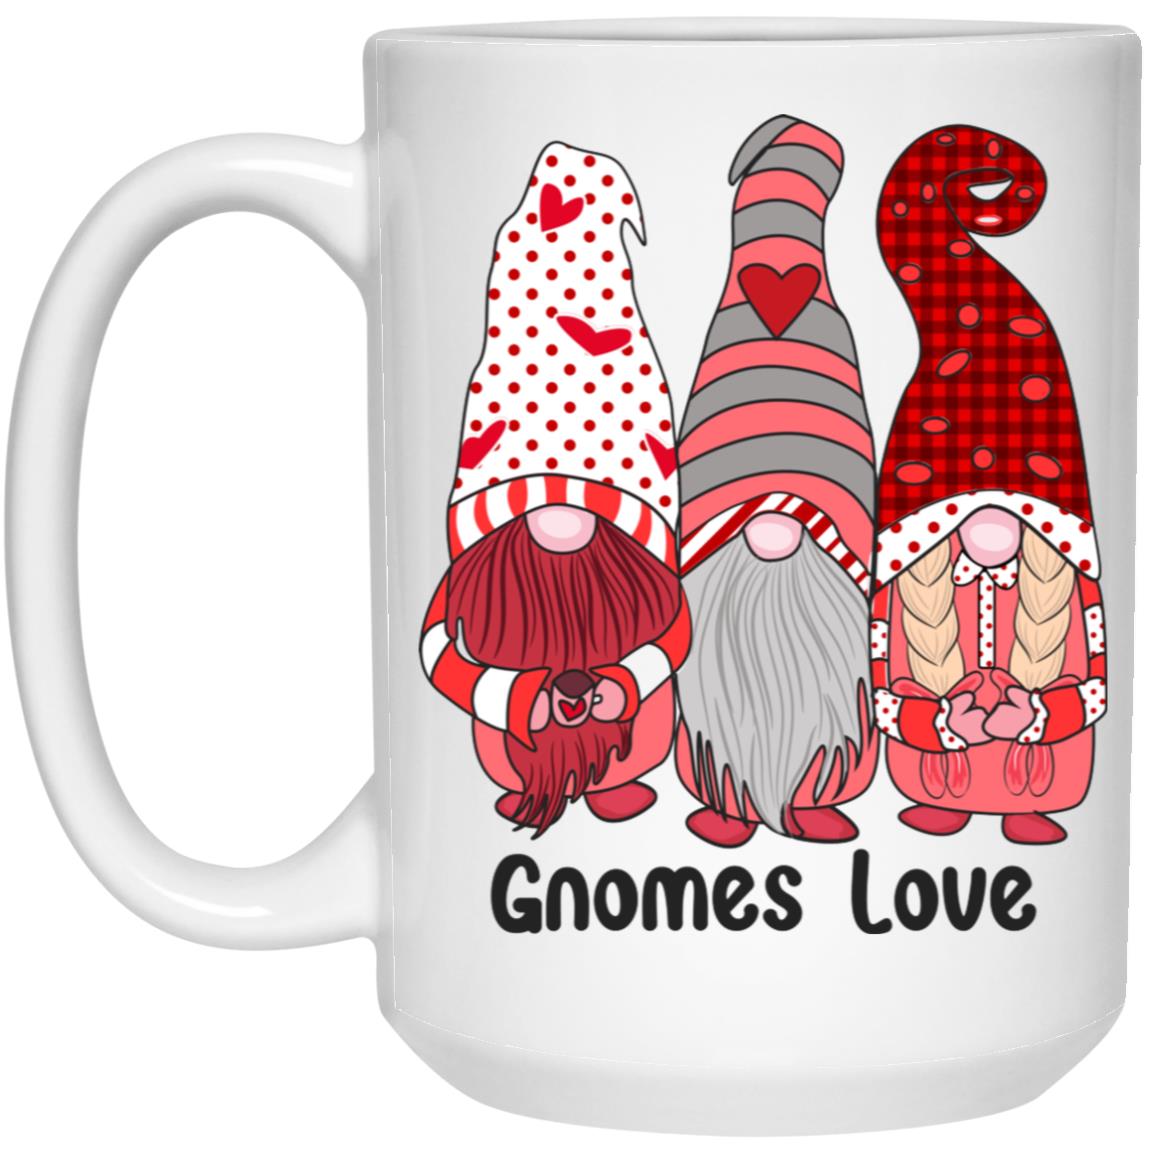 Gnomes Love 15oz White Mug – Whimsical Charm for Your Daily Sip! - Expressive DeZien 